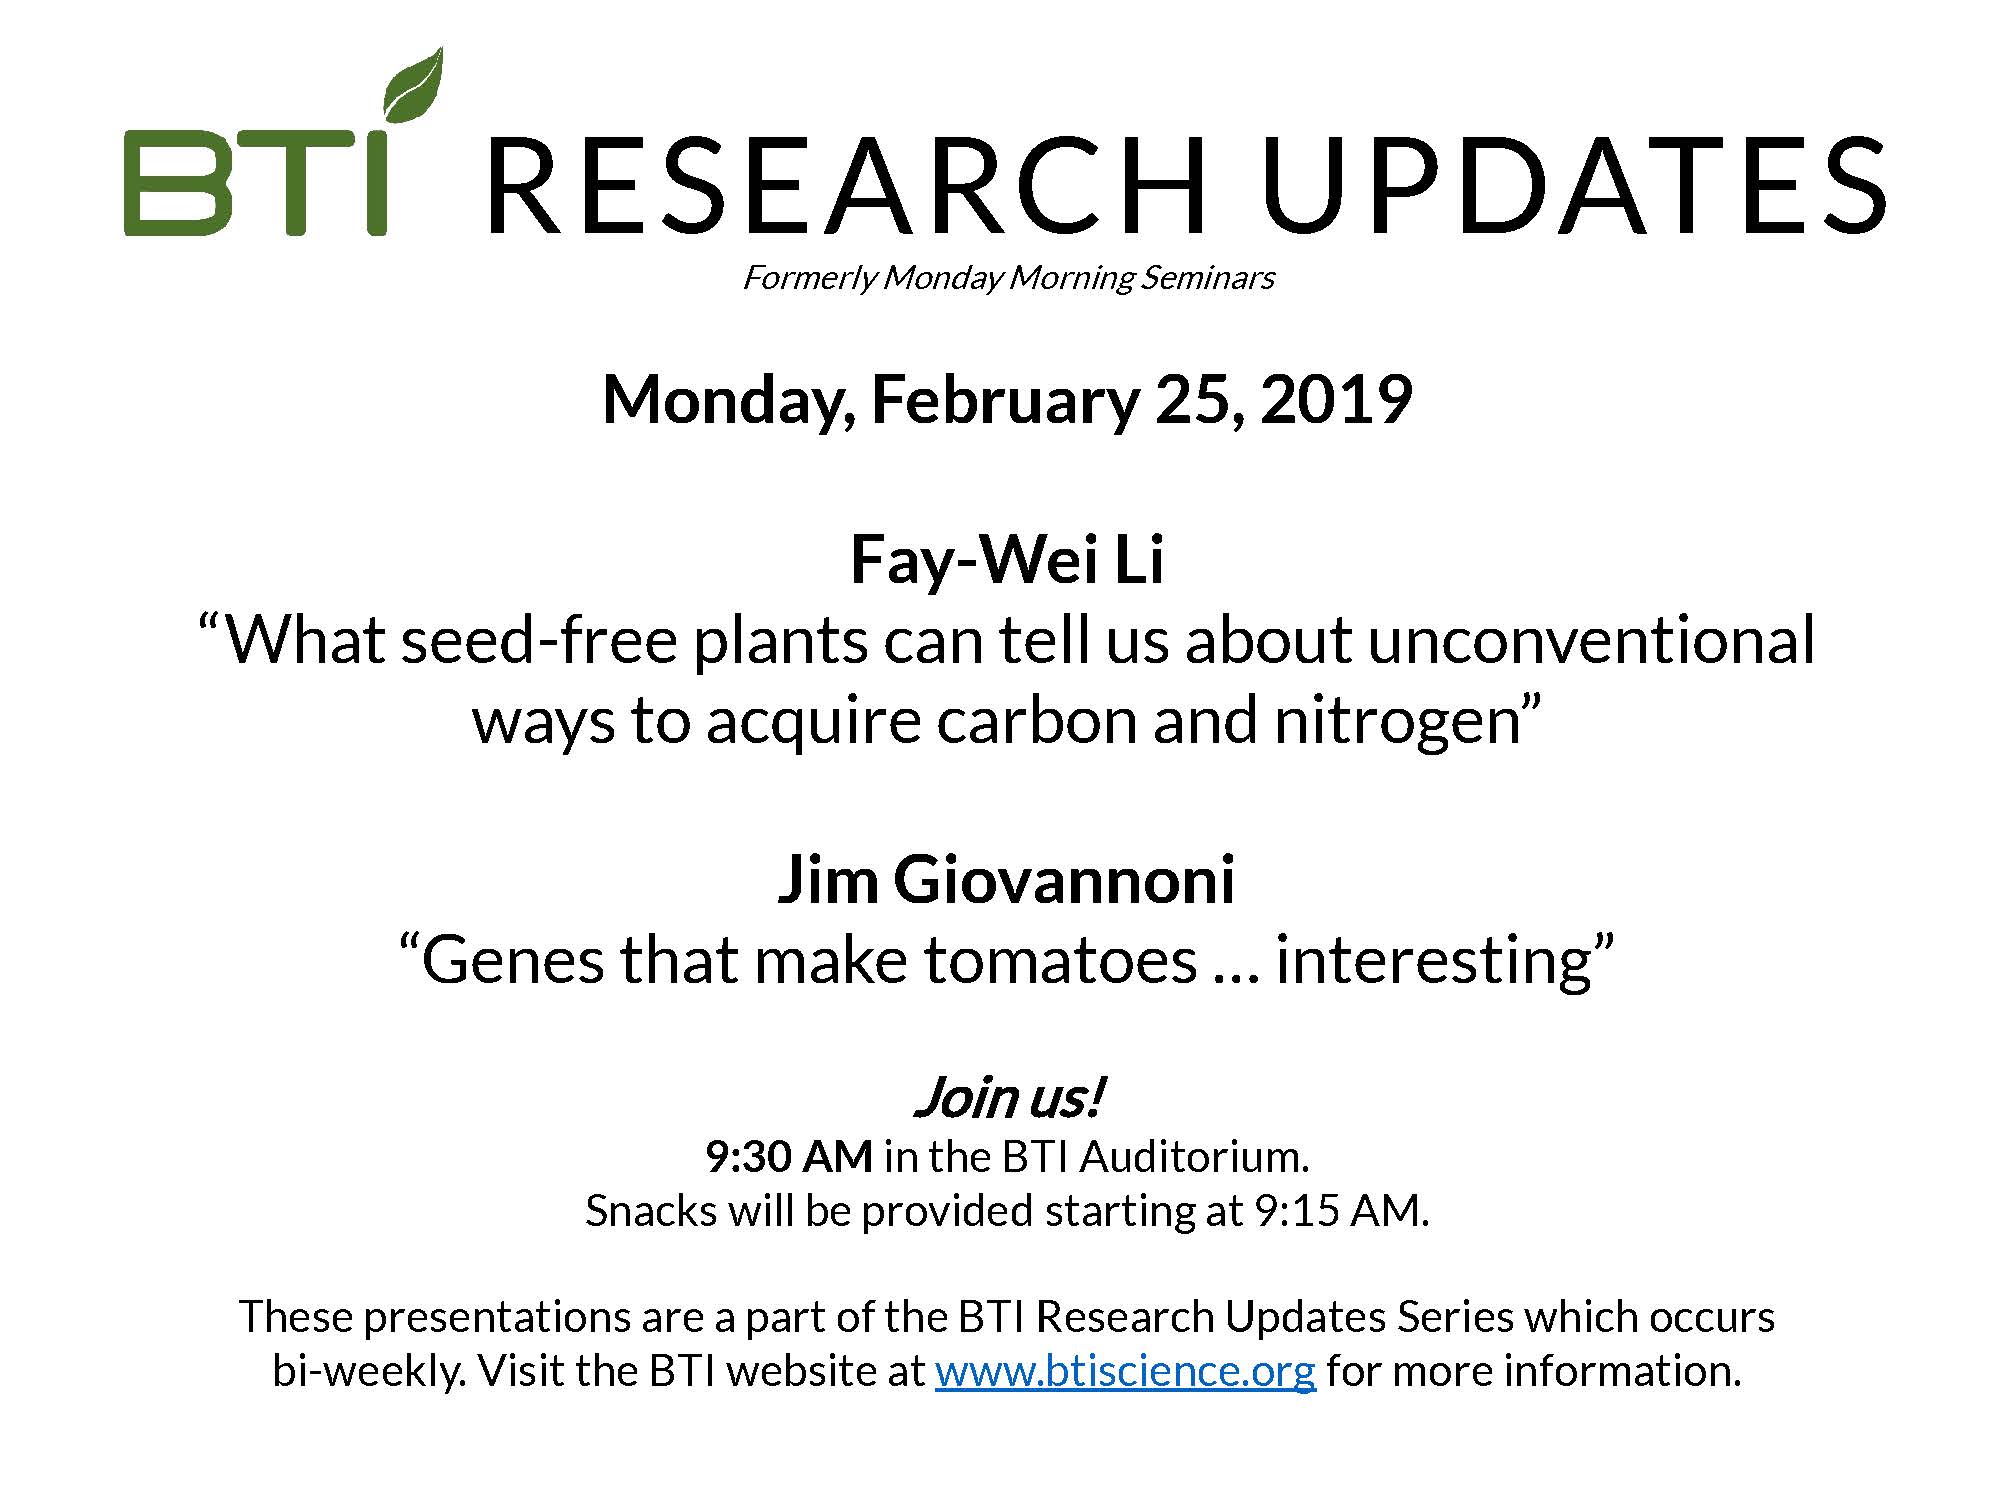 BTI Research Update - Fay-Wei Li and Jim Giovannoni. Monday, February 25, 2019. Fay-Wei Li “What seed-free plants can tell us about unconventional ways to acquire carbon and nitrogen” Jim Giovannoni “Genes that make tomatoes … interesting” Join us! 9:30 AM in the BTI Auditorium. Snacks will be provided starting at 9:15 AM. These presentations are a part of the BTI Research Updates Series which occurs bi-weekly. Visit the BTI website at www.btiscience.org for more information. 